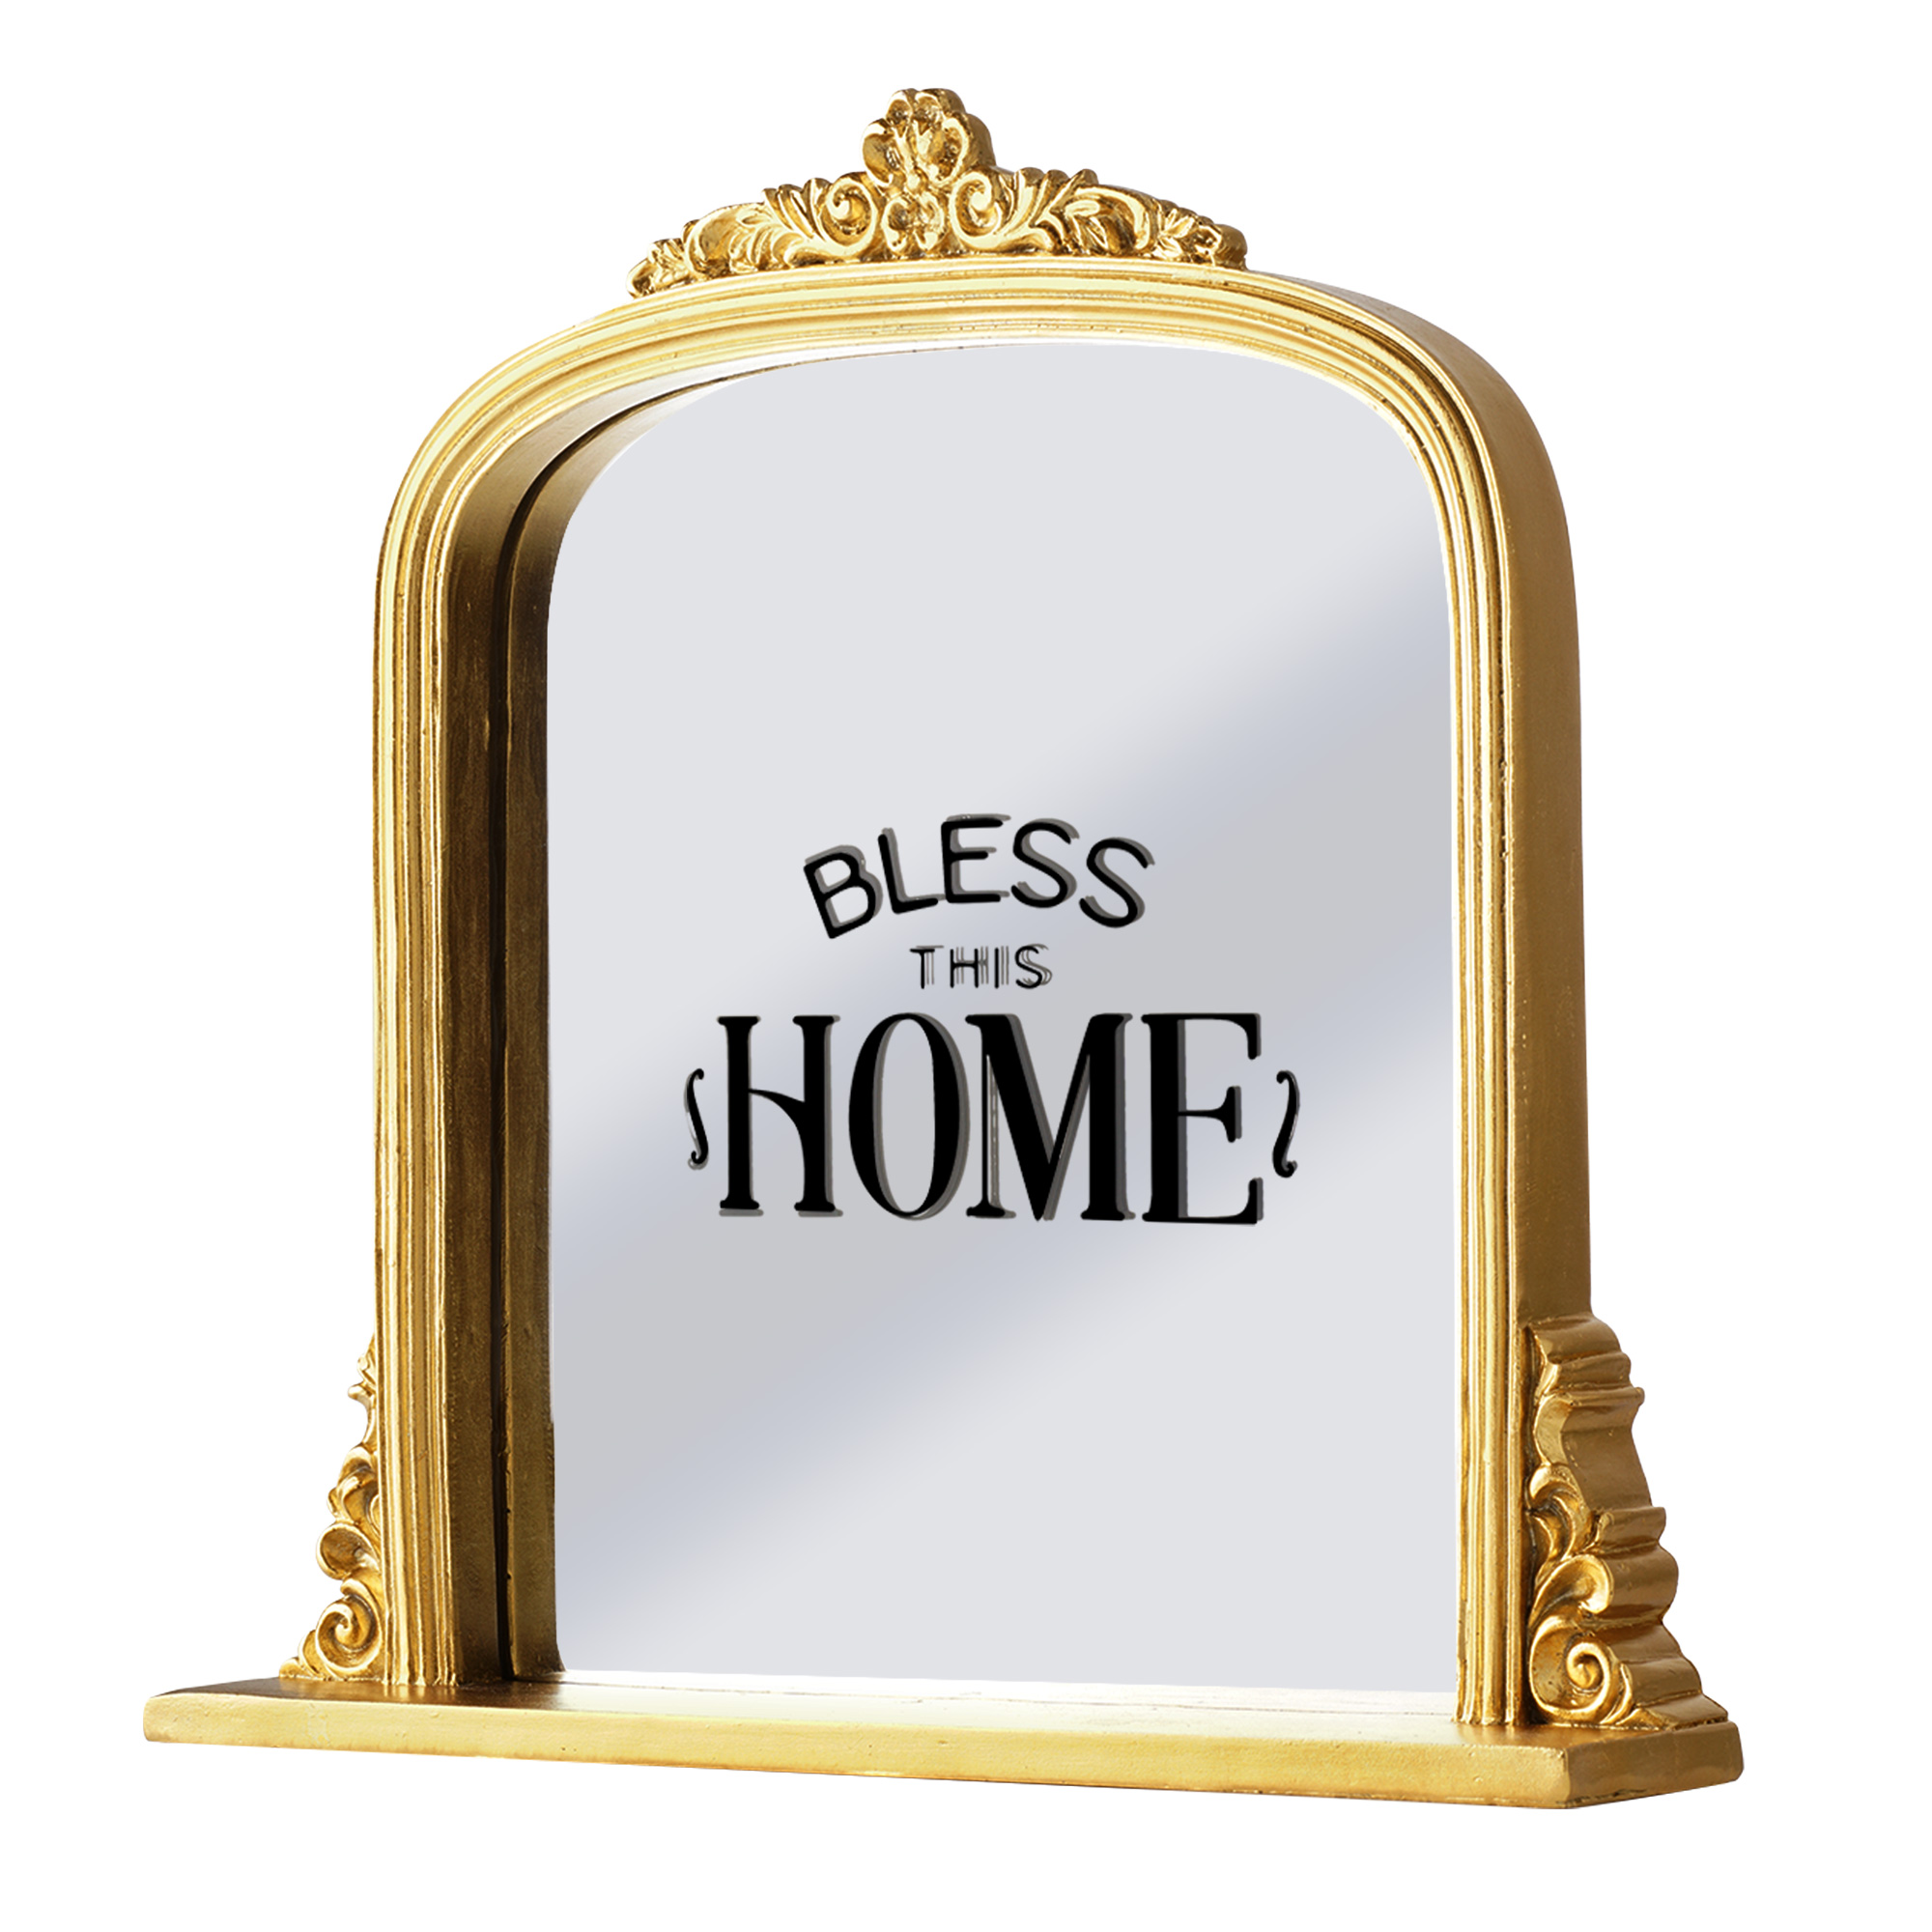 Crystal Art Gallery Round Top Vintage Standing Sign Mirror Gold Color Resin Frame 12 inch x 12.5 inch Size: 12 inch